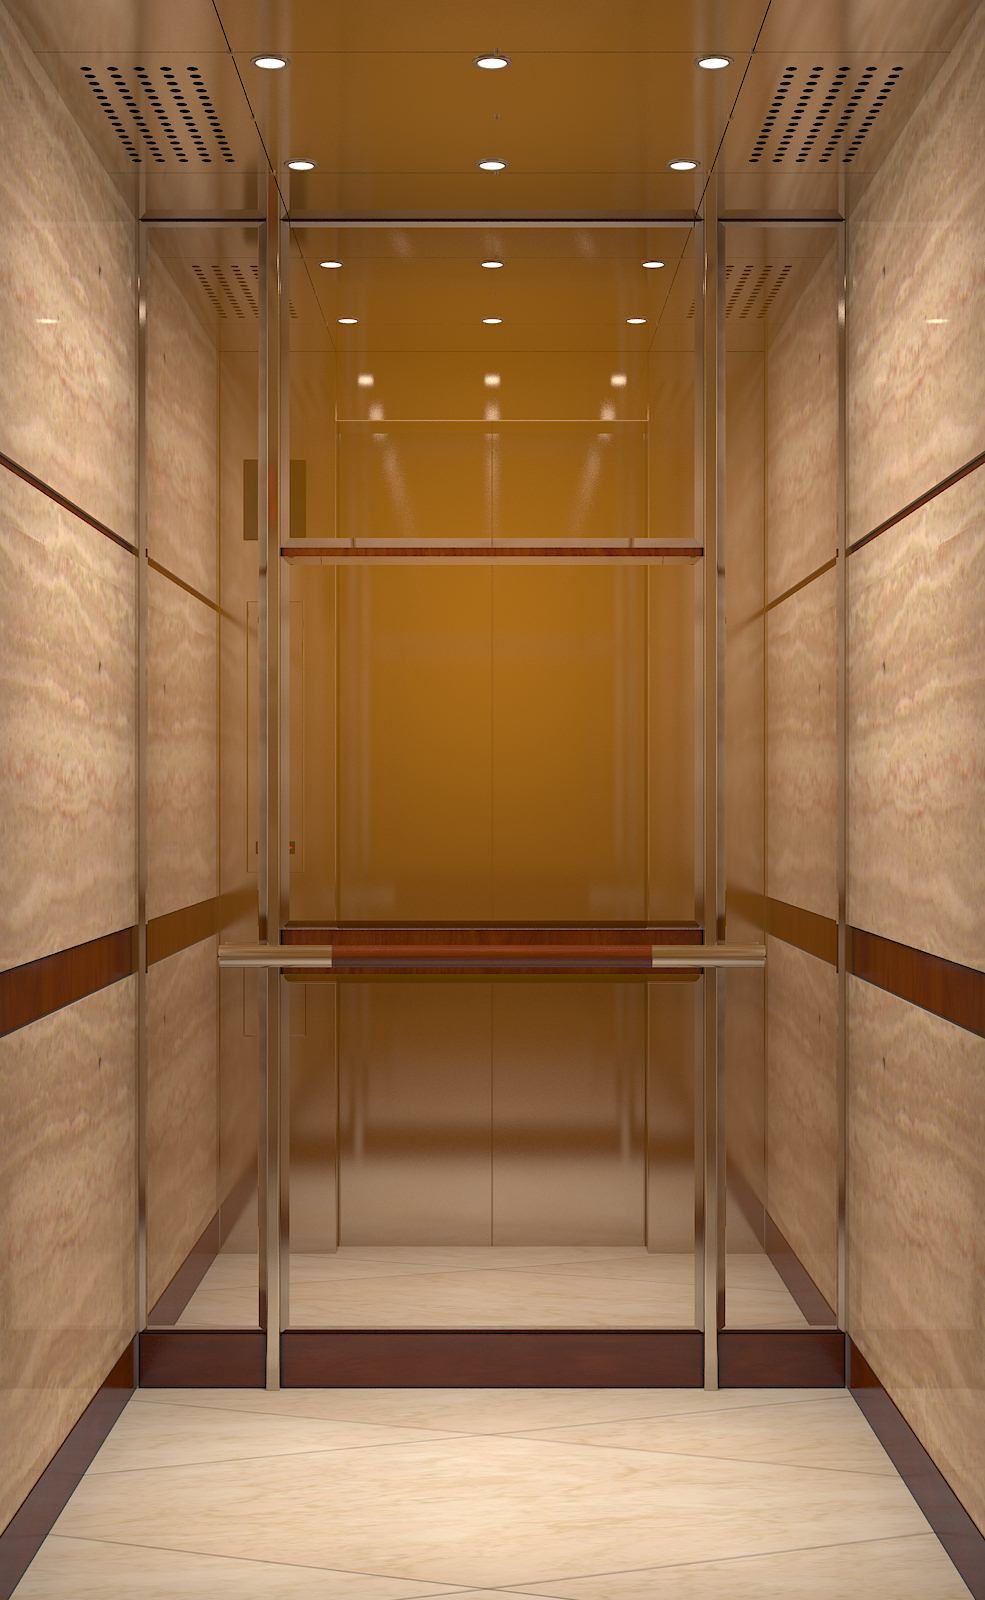 Passenger Elevator with Marble Cabin